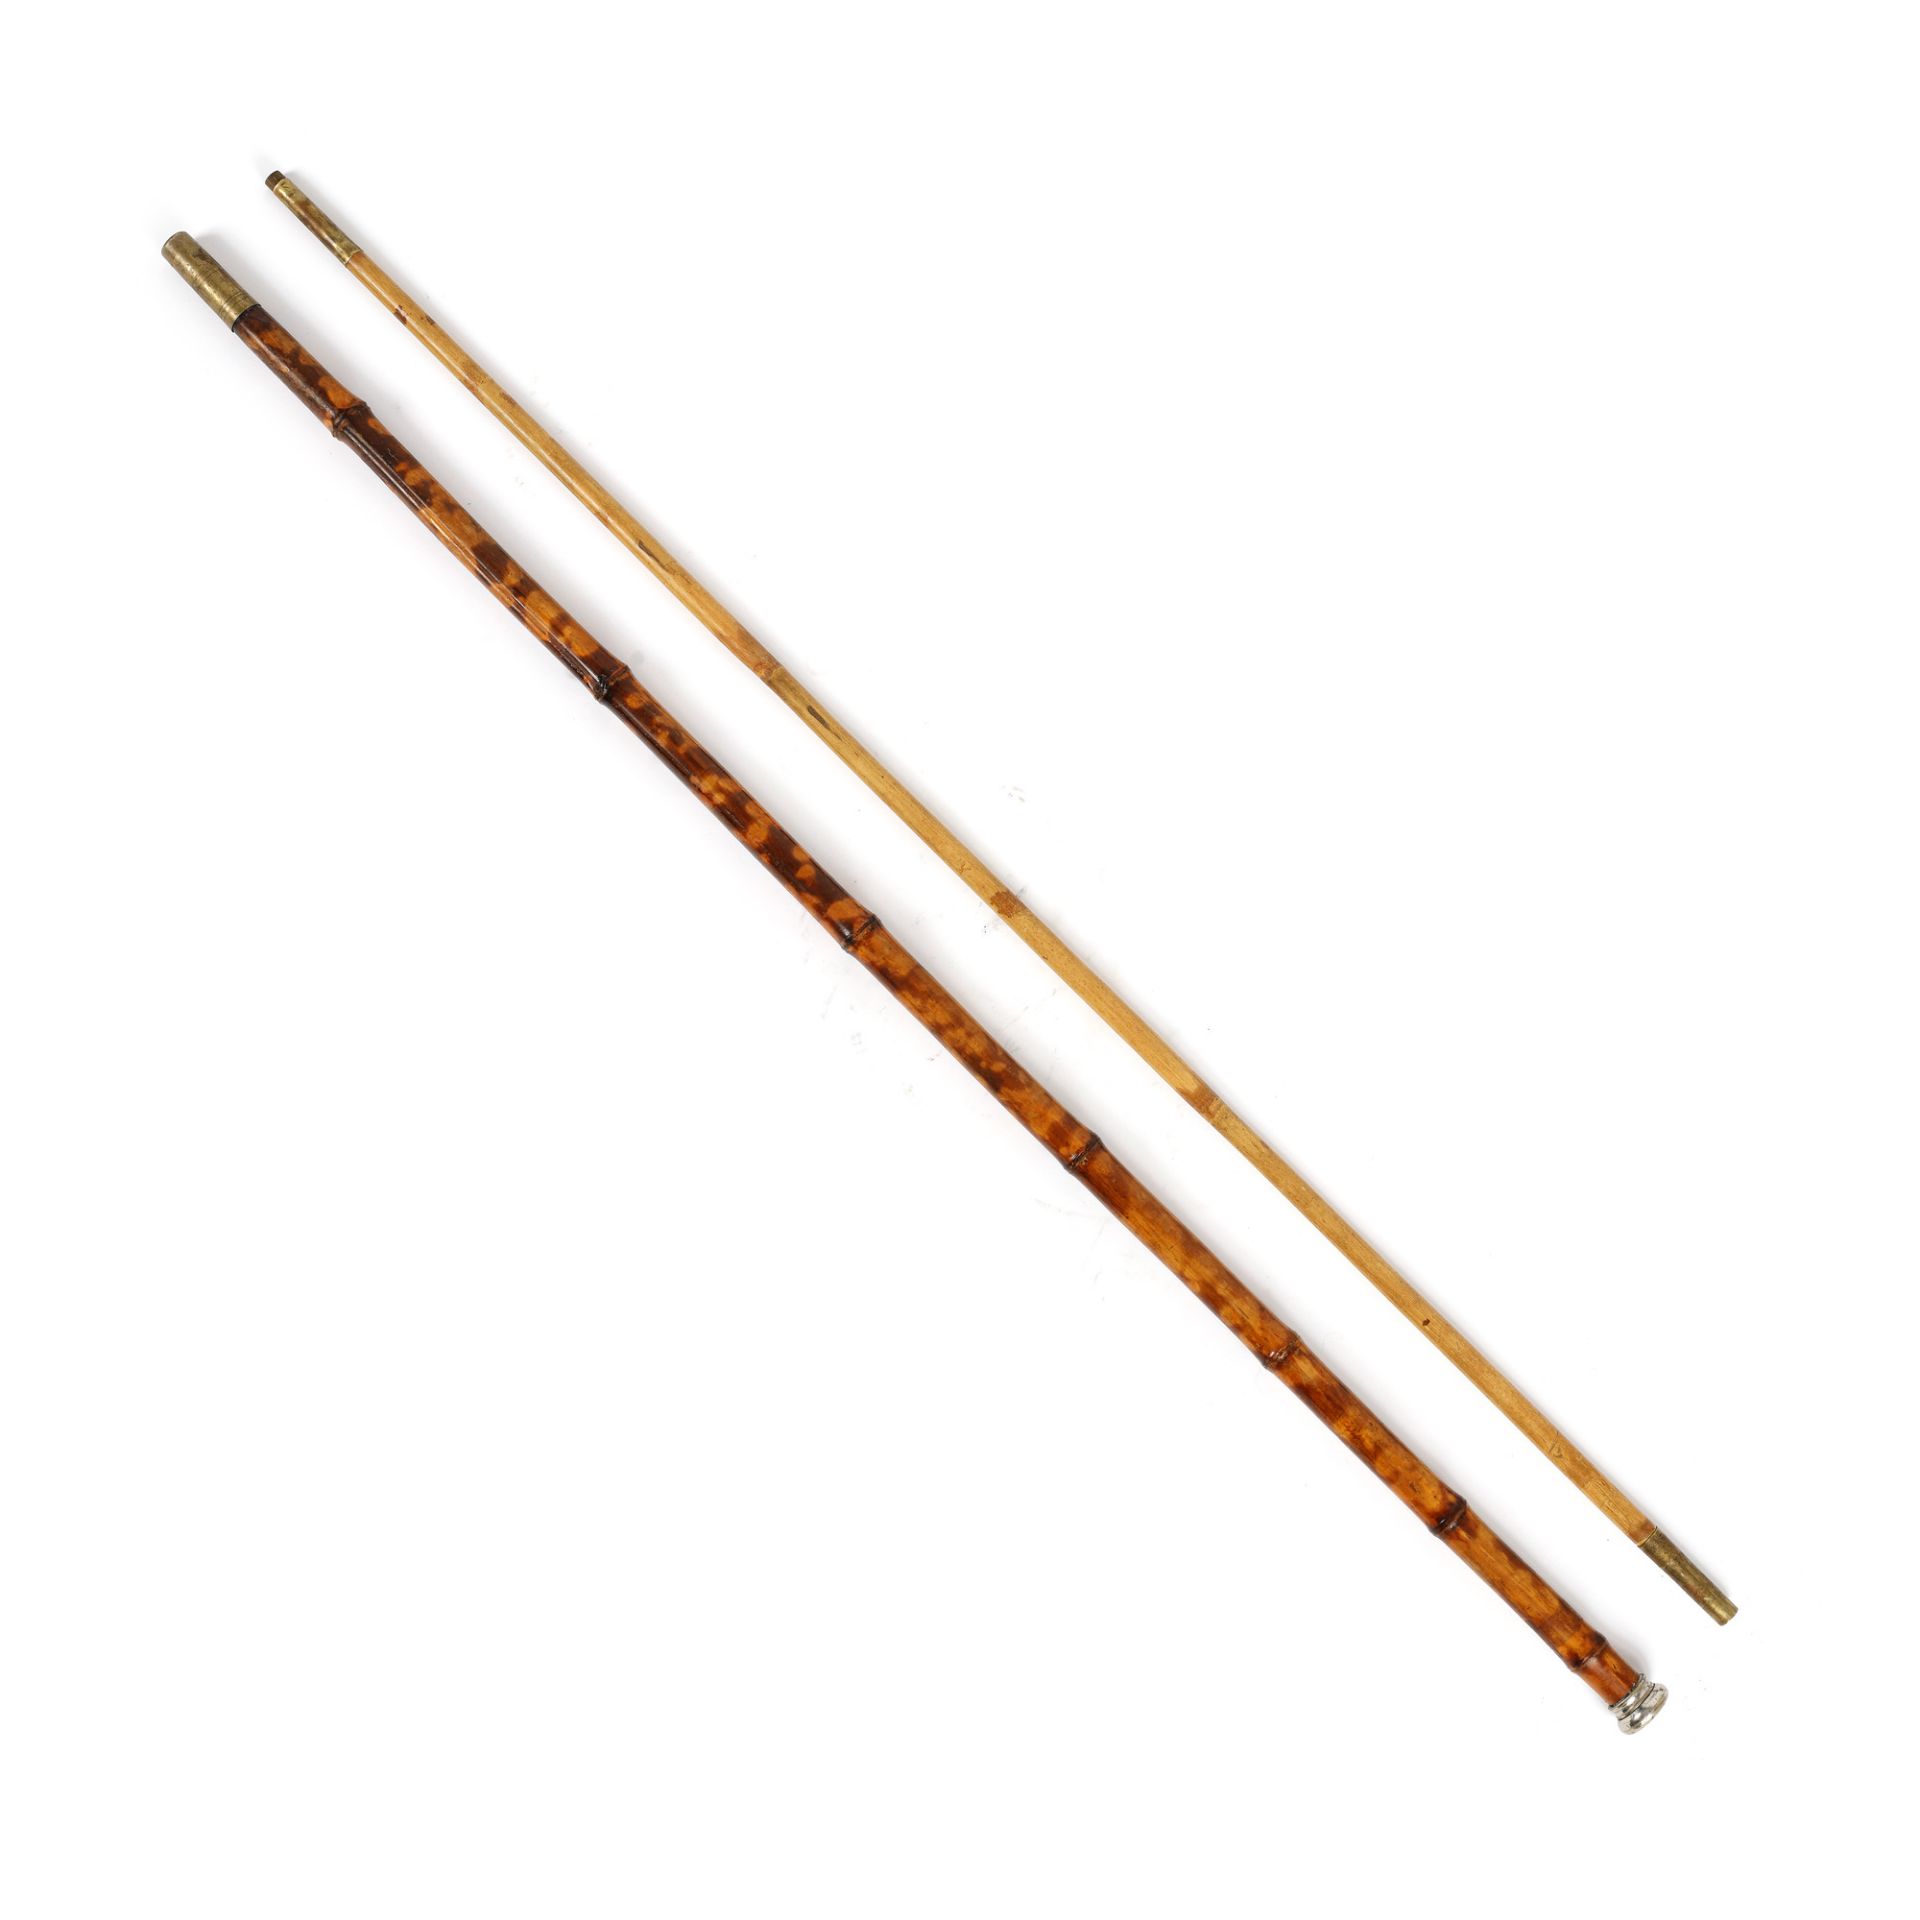 Bamboo rod-cane, middle 20th century - Image 2 of 2